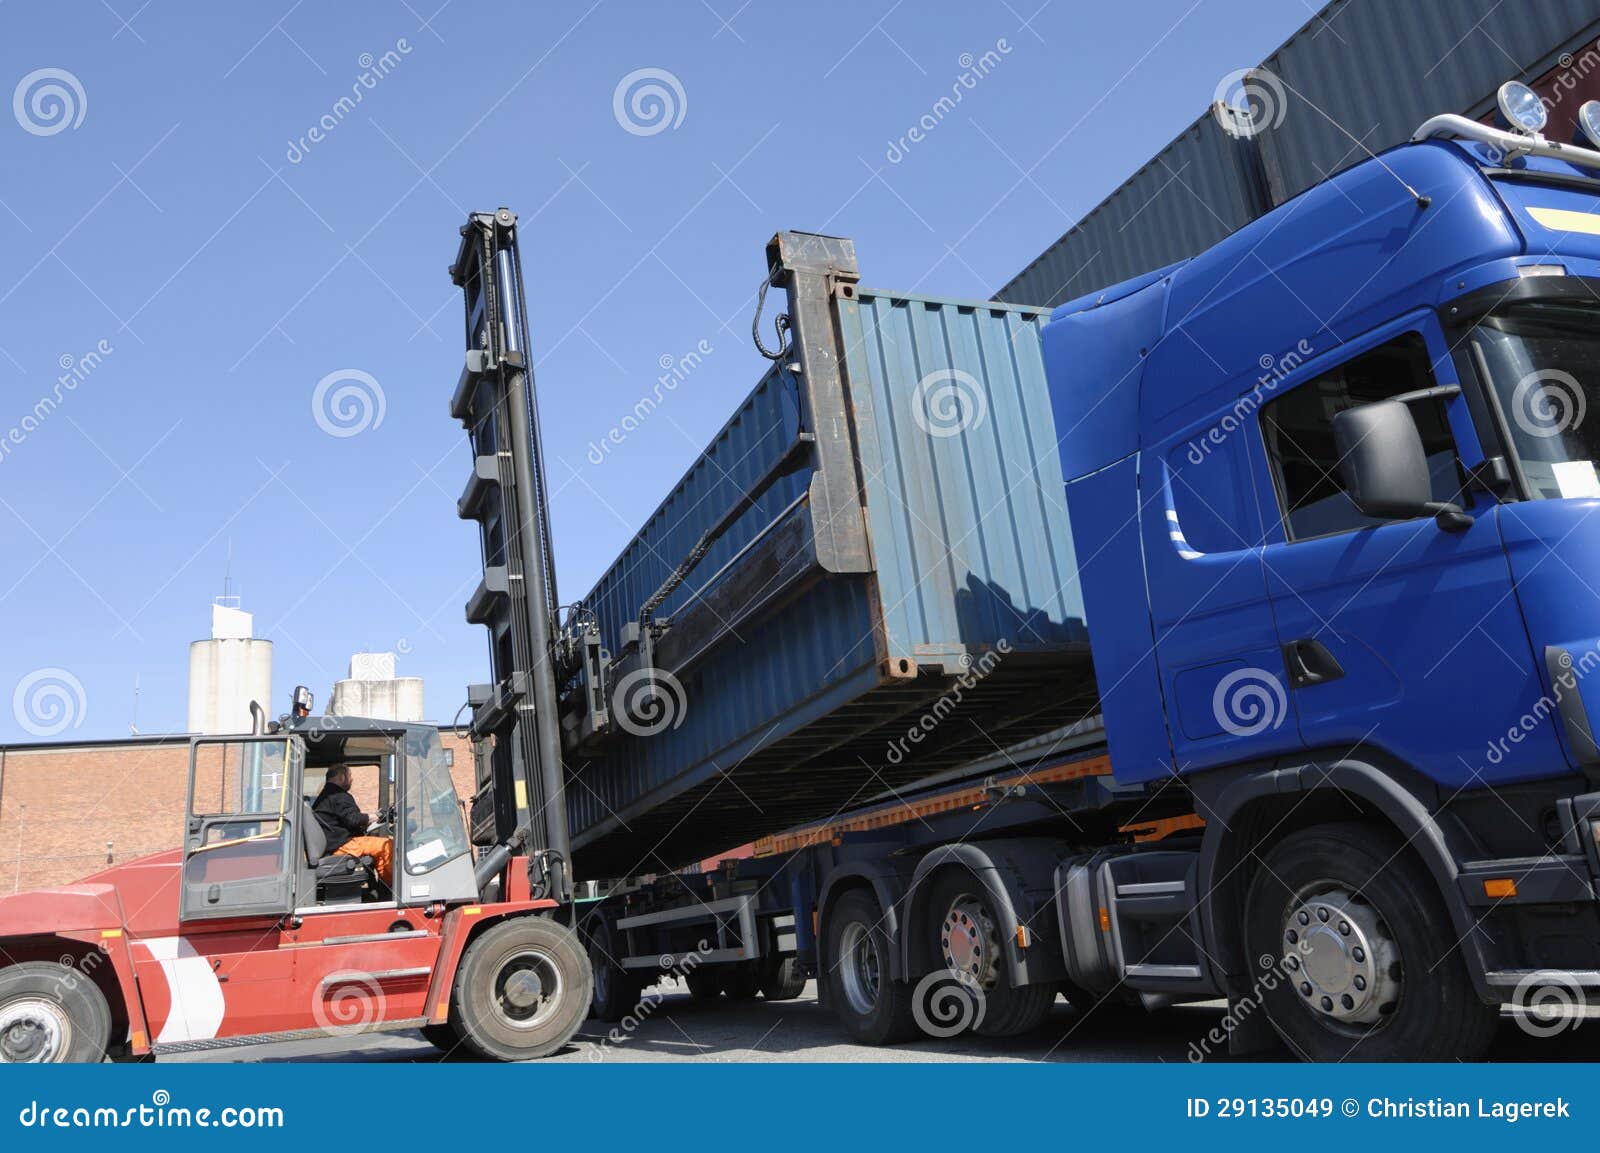 forklift hoisting cargo and shipping containers